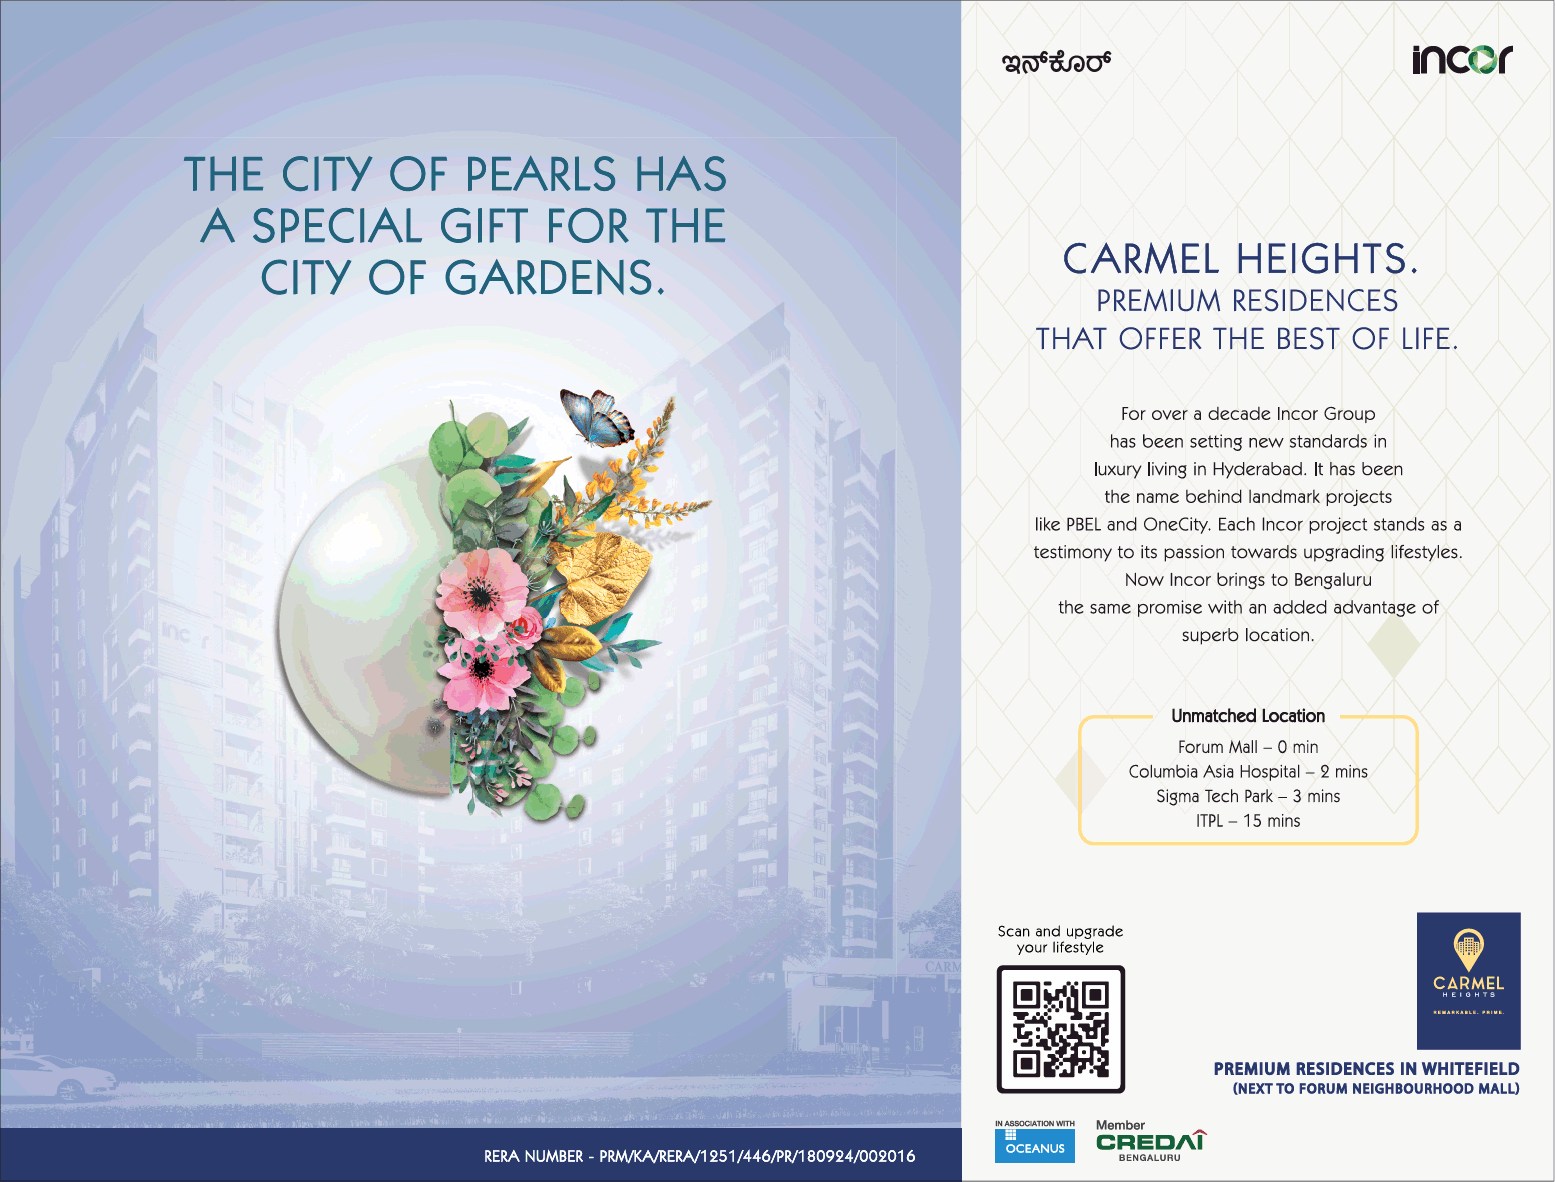 Incor Carmel Heights premium residences in Whitefield, Bangalore Update